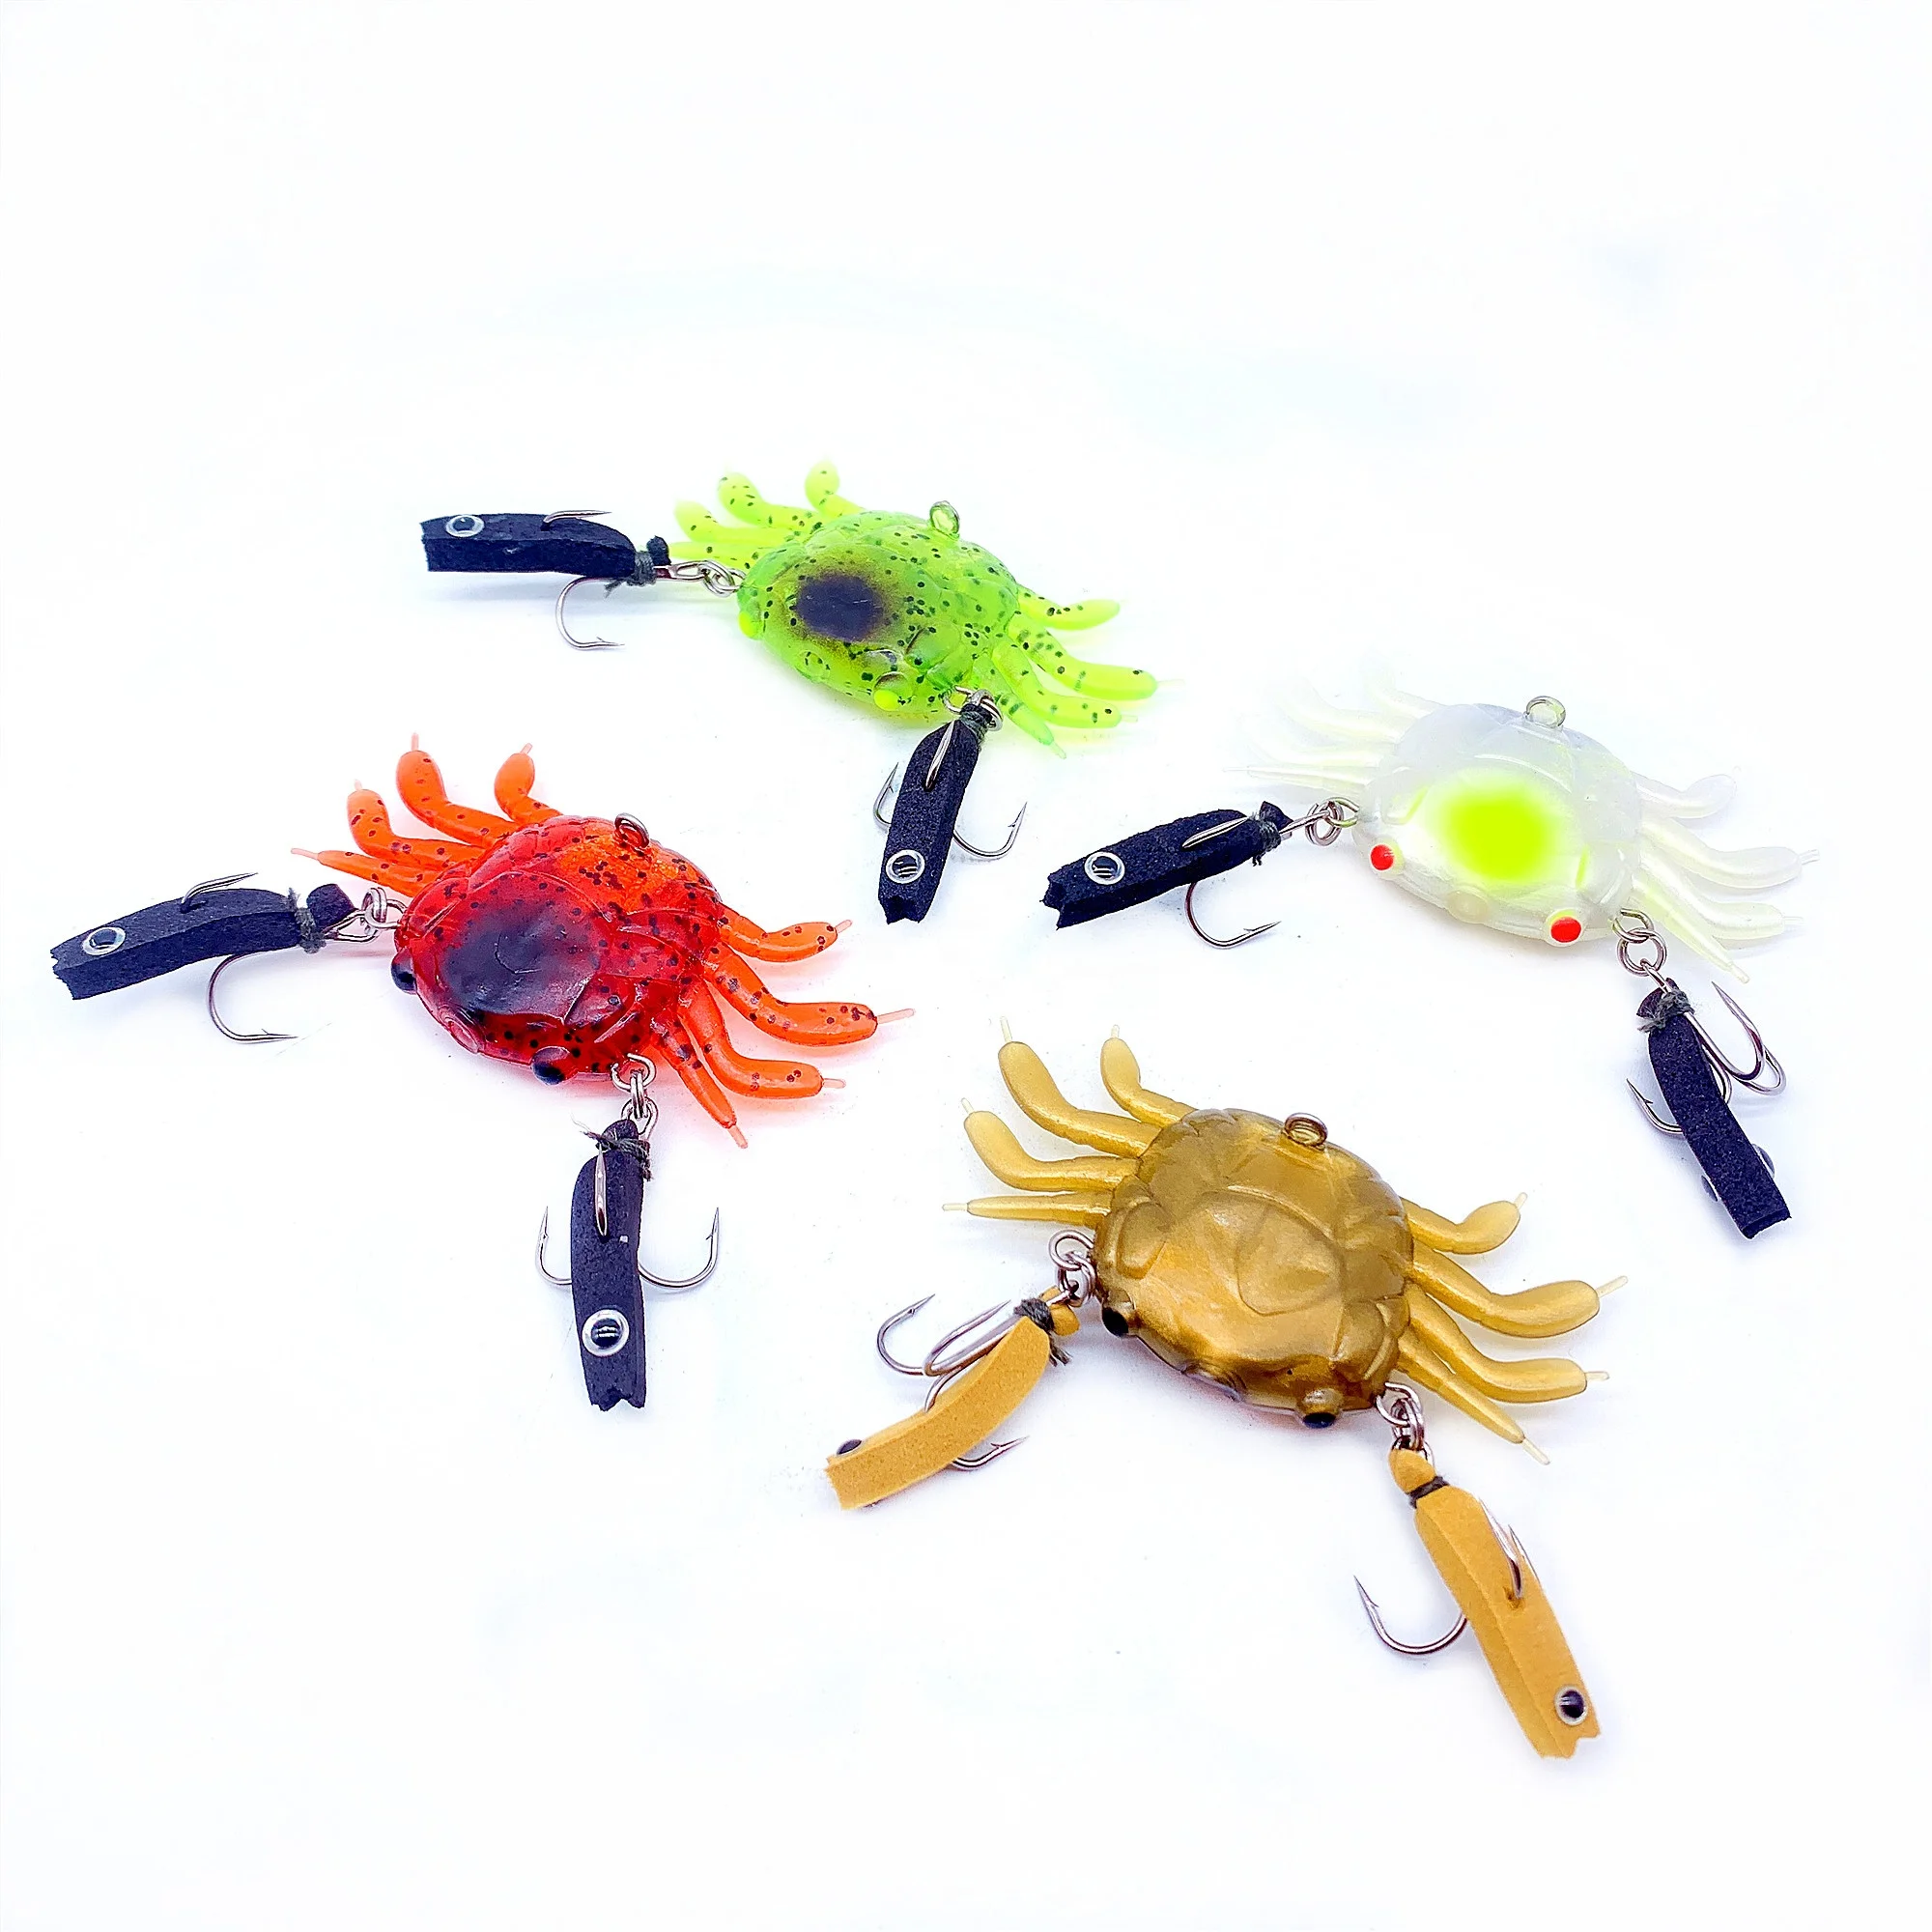 

45mm/65mm Soft Plastic Fishing lure Simulation Crab Lures for Bass Trout Crab Fishing Biat